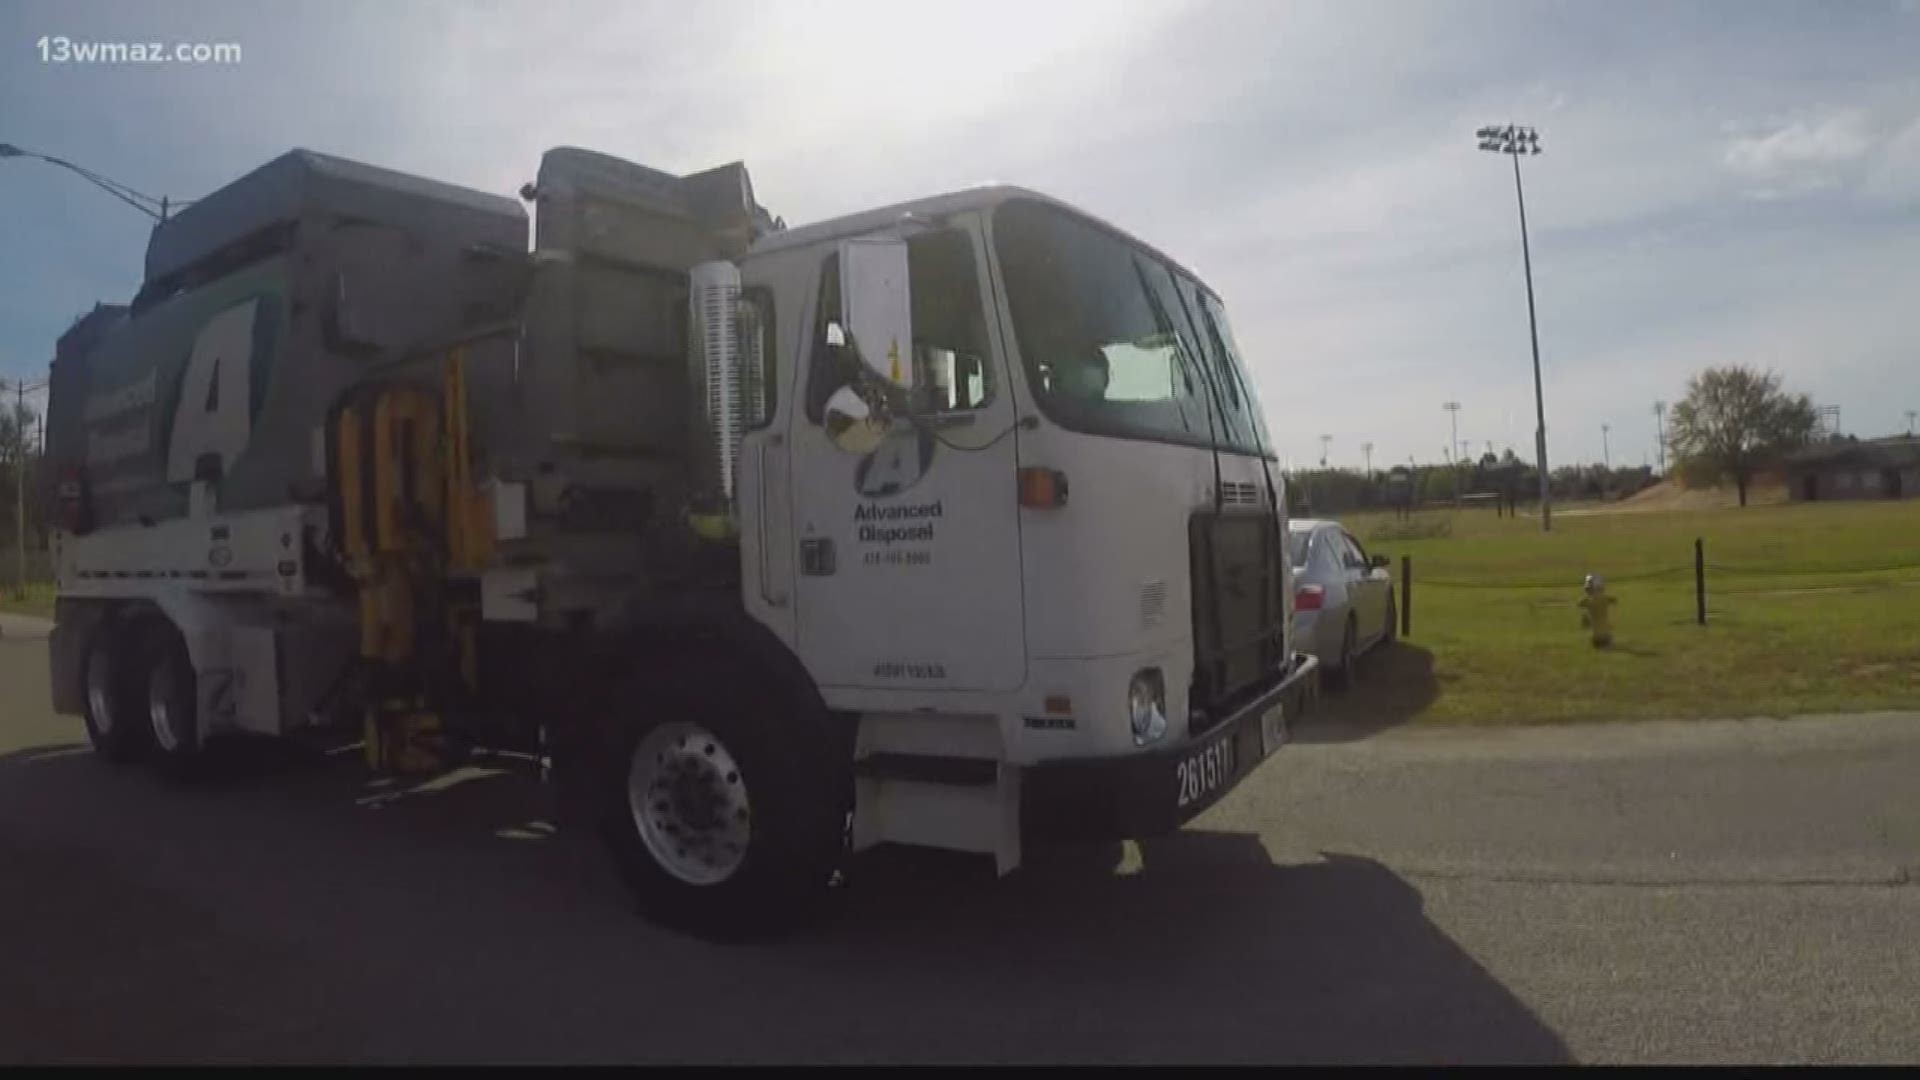 Another change coming to Bibb County, beginning Monday, recycling collection is going away in downtown Macon. Chelsea Beimfohr explains the problem that a recent inspection uncovered and what other changes you'll see because of the discovery.